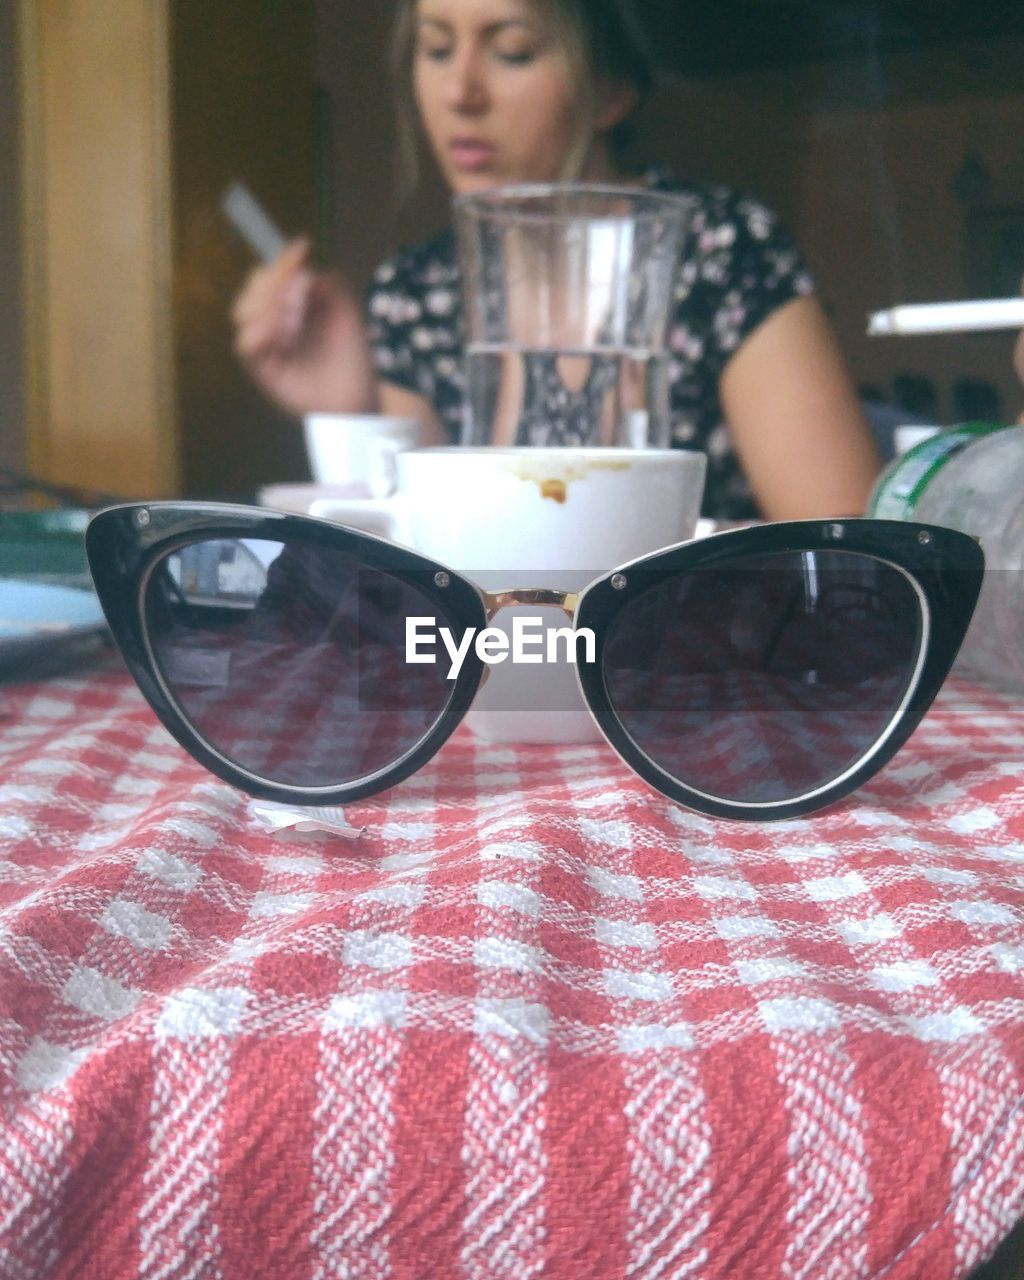 Close-up of sunglasses with woman sitting in background